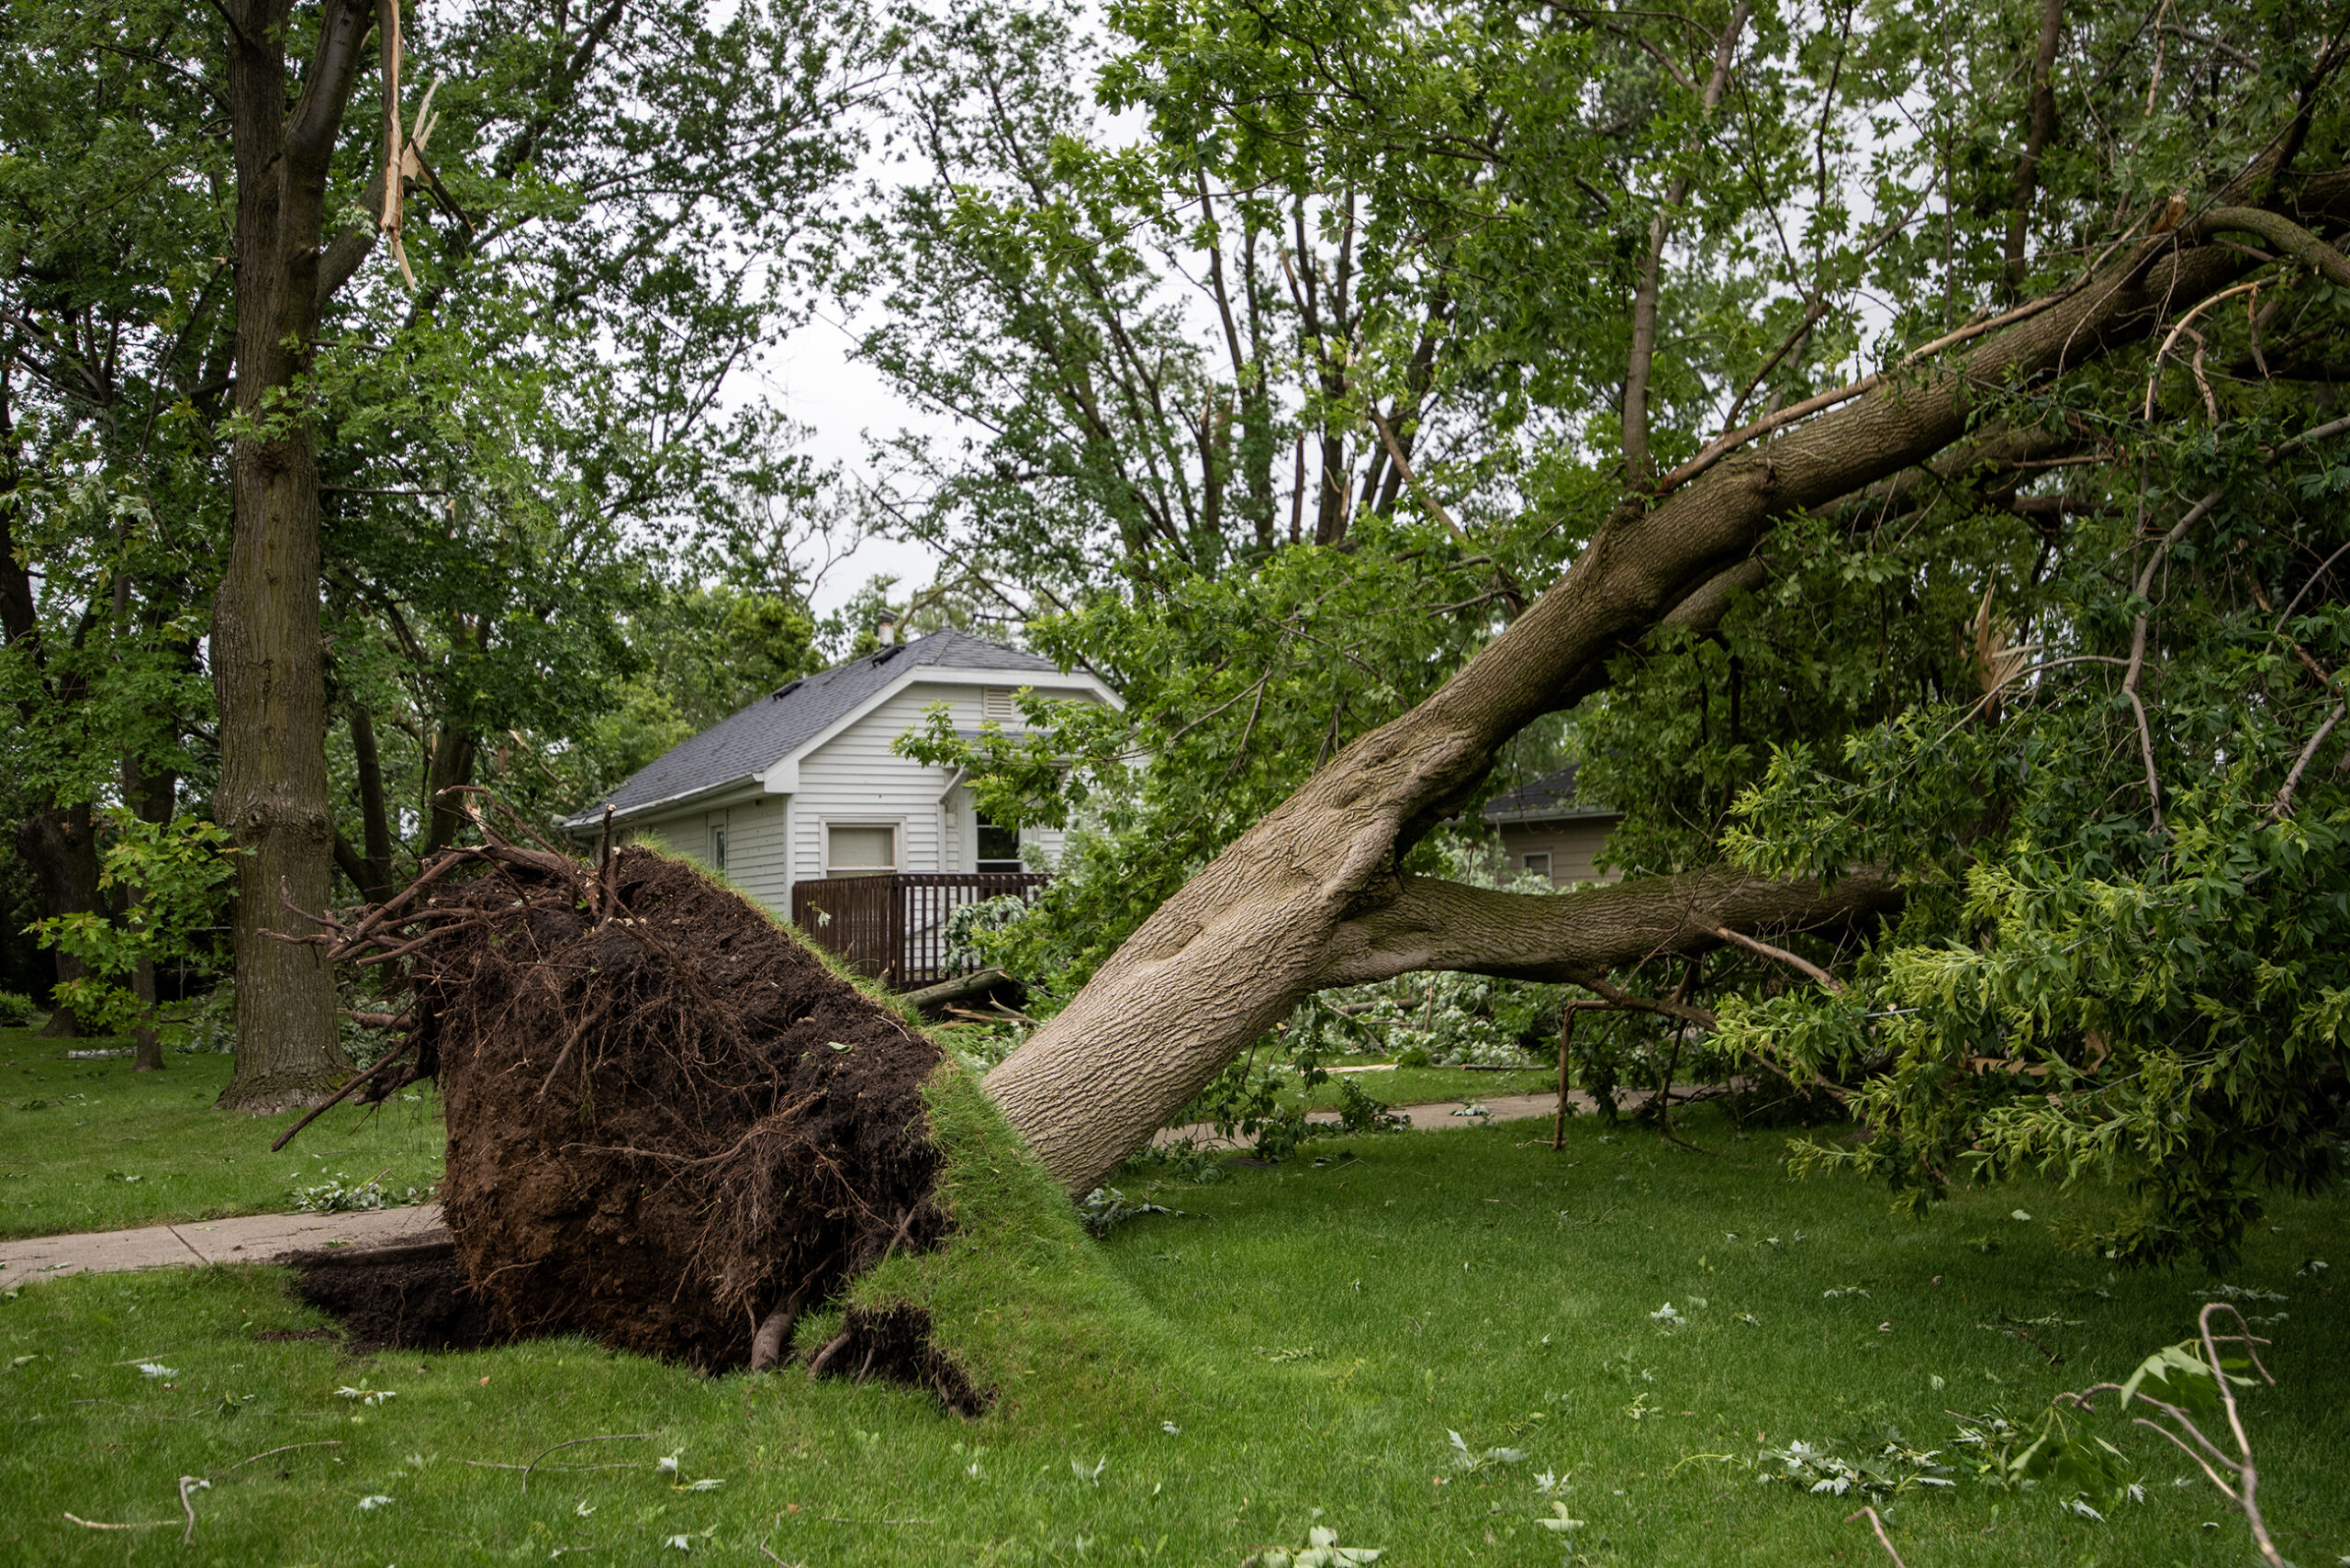 ‘Very active’ severe weather season in Wisconsin approaching 10-year high for tornadoes